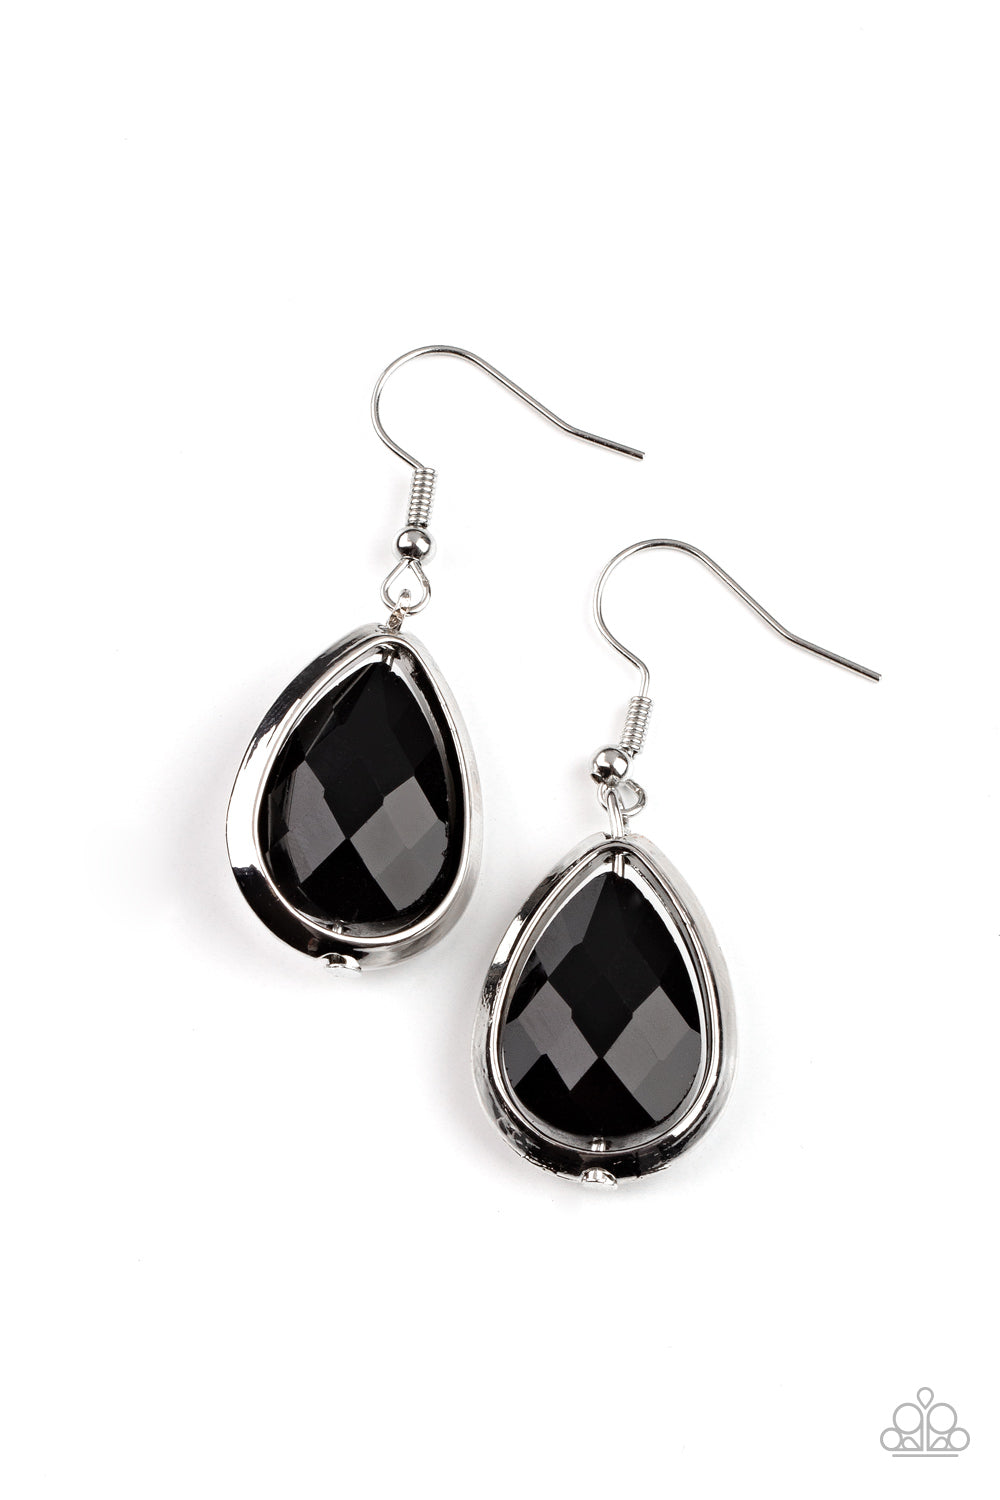 Featuring a reflective metallic back, a glittery black rhinestone gem is threaded along a rod inside a silver teardrop casing, creating a glamorous lure. Earring attaches to a standard fishhook fitting.